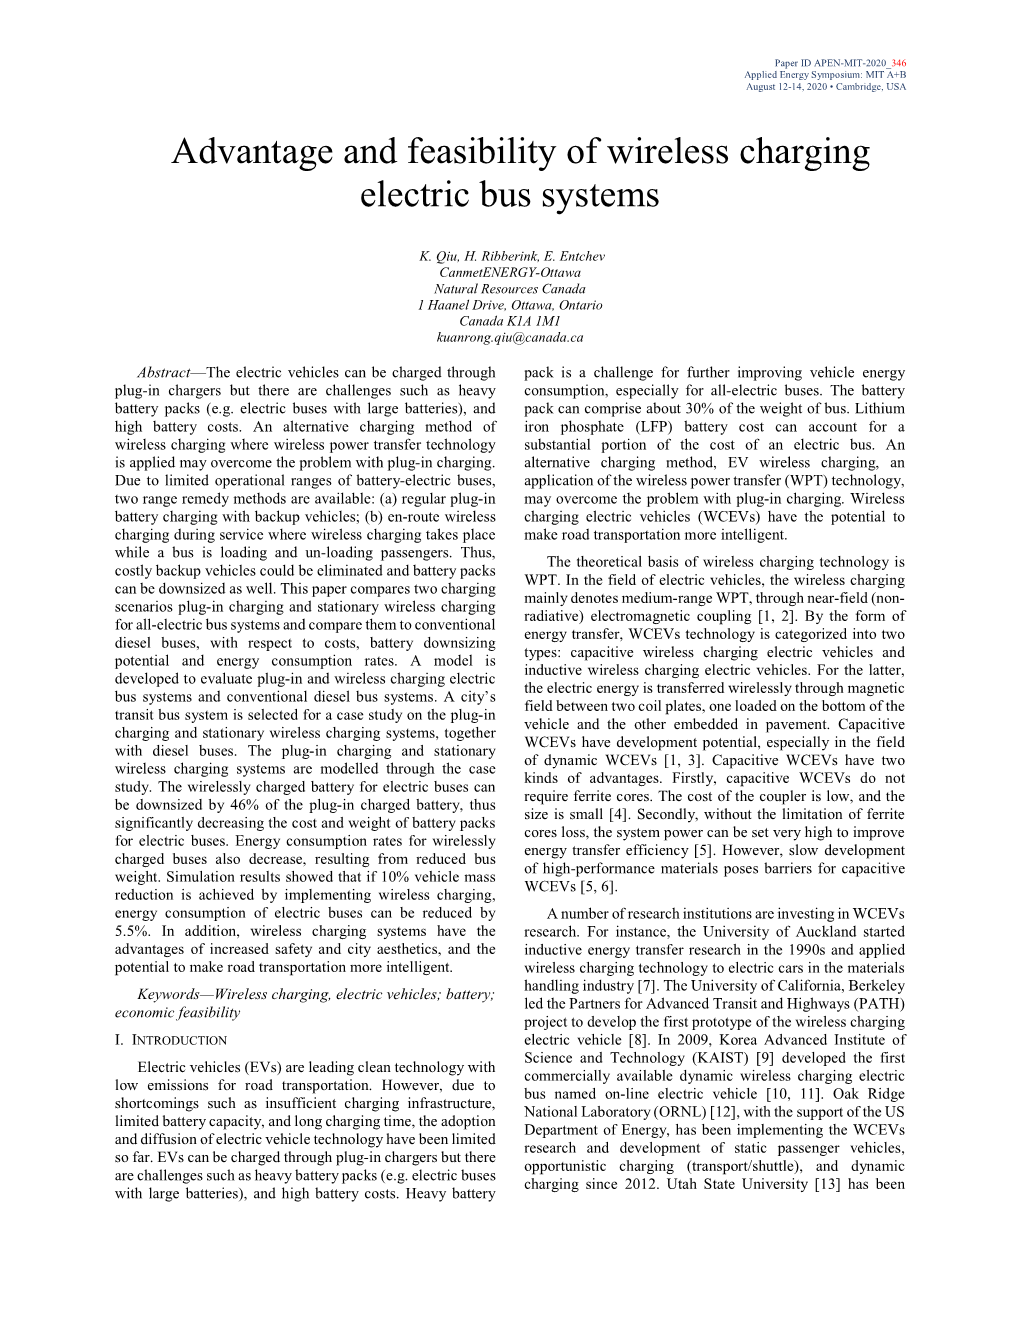 Advantage and Feasibility of Wireless Charging Electric Bus Systems